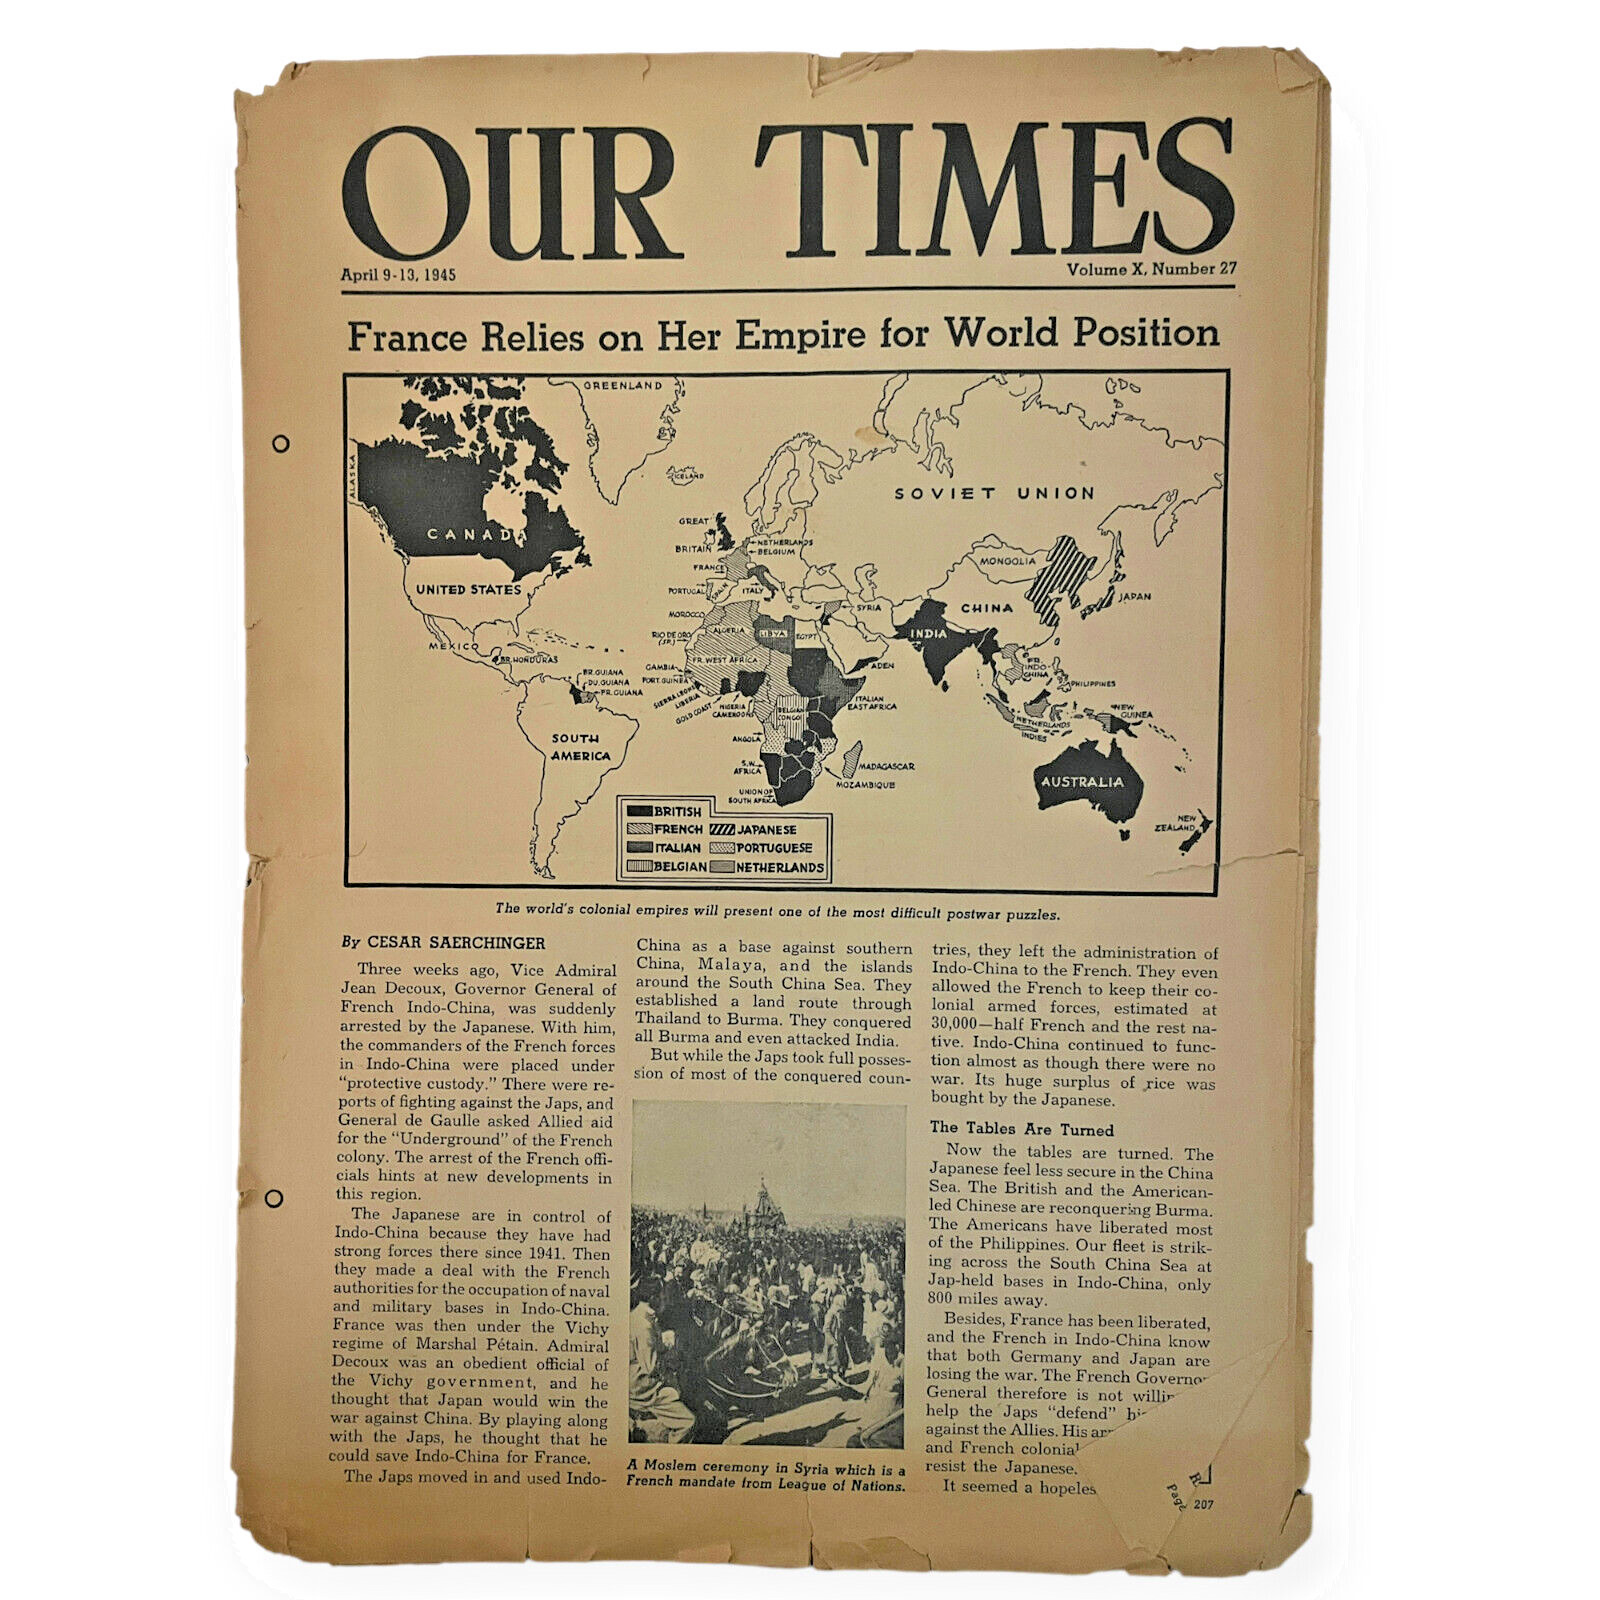 Our Times American Education Press World News School Newspaper April 9-13 1945